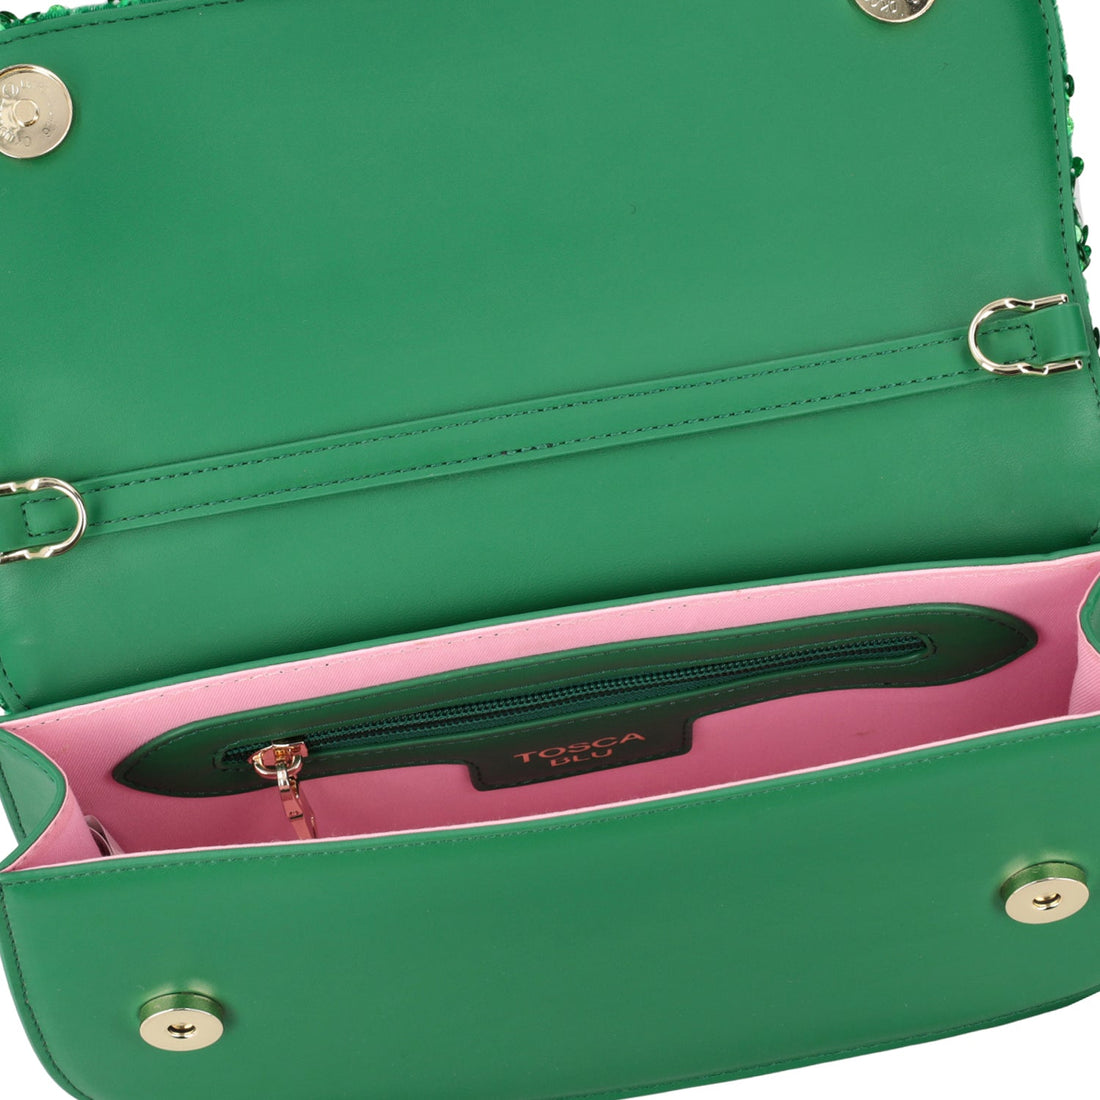 GREEN COSMOPOLITAN SHOULDER BAG EMBROIDERED WITH PEARL